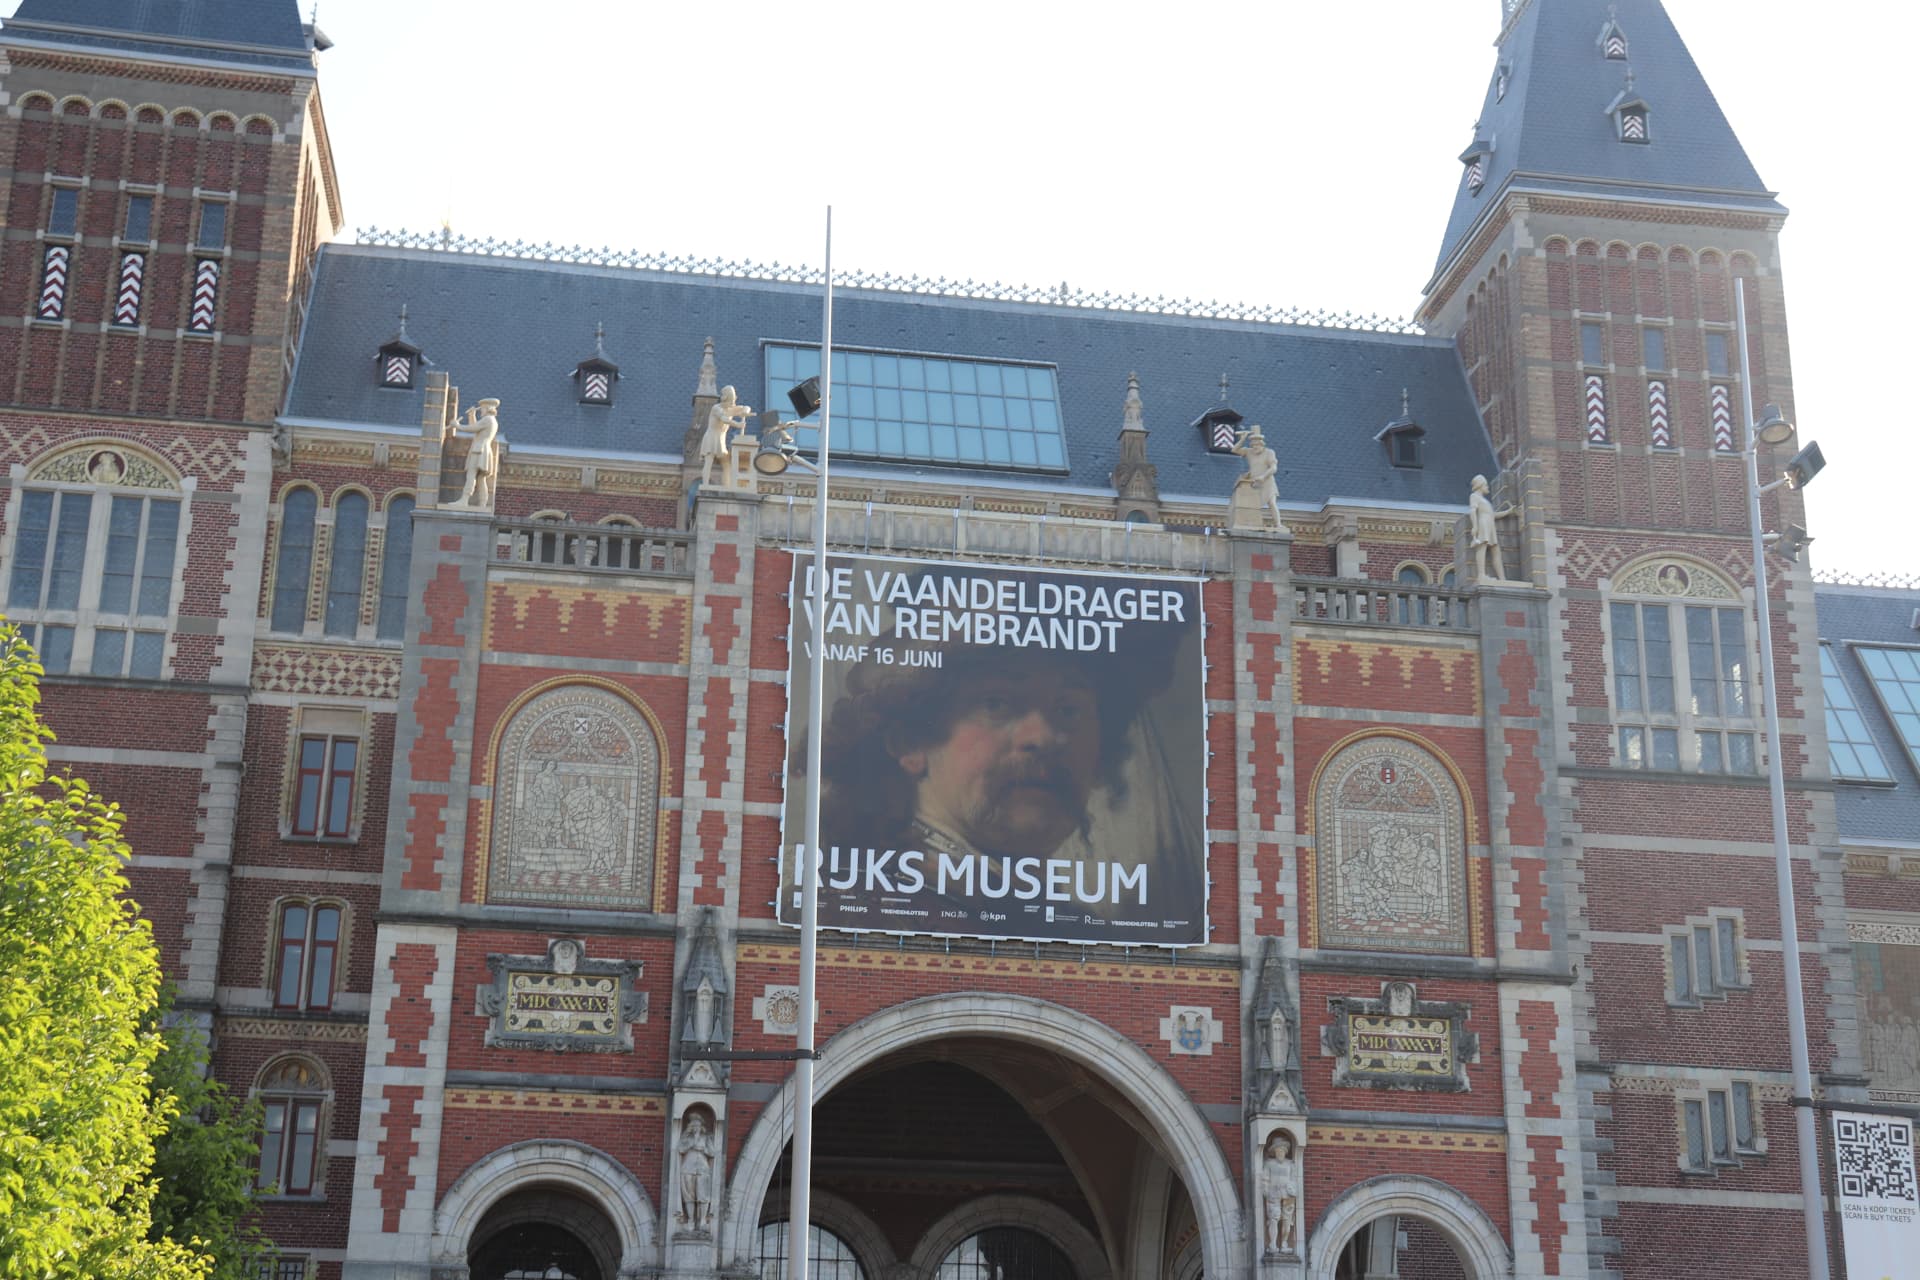 Outside of the Rijksmuseum with a banner depicting Rembrandt